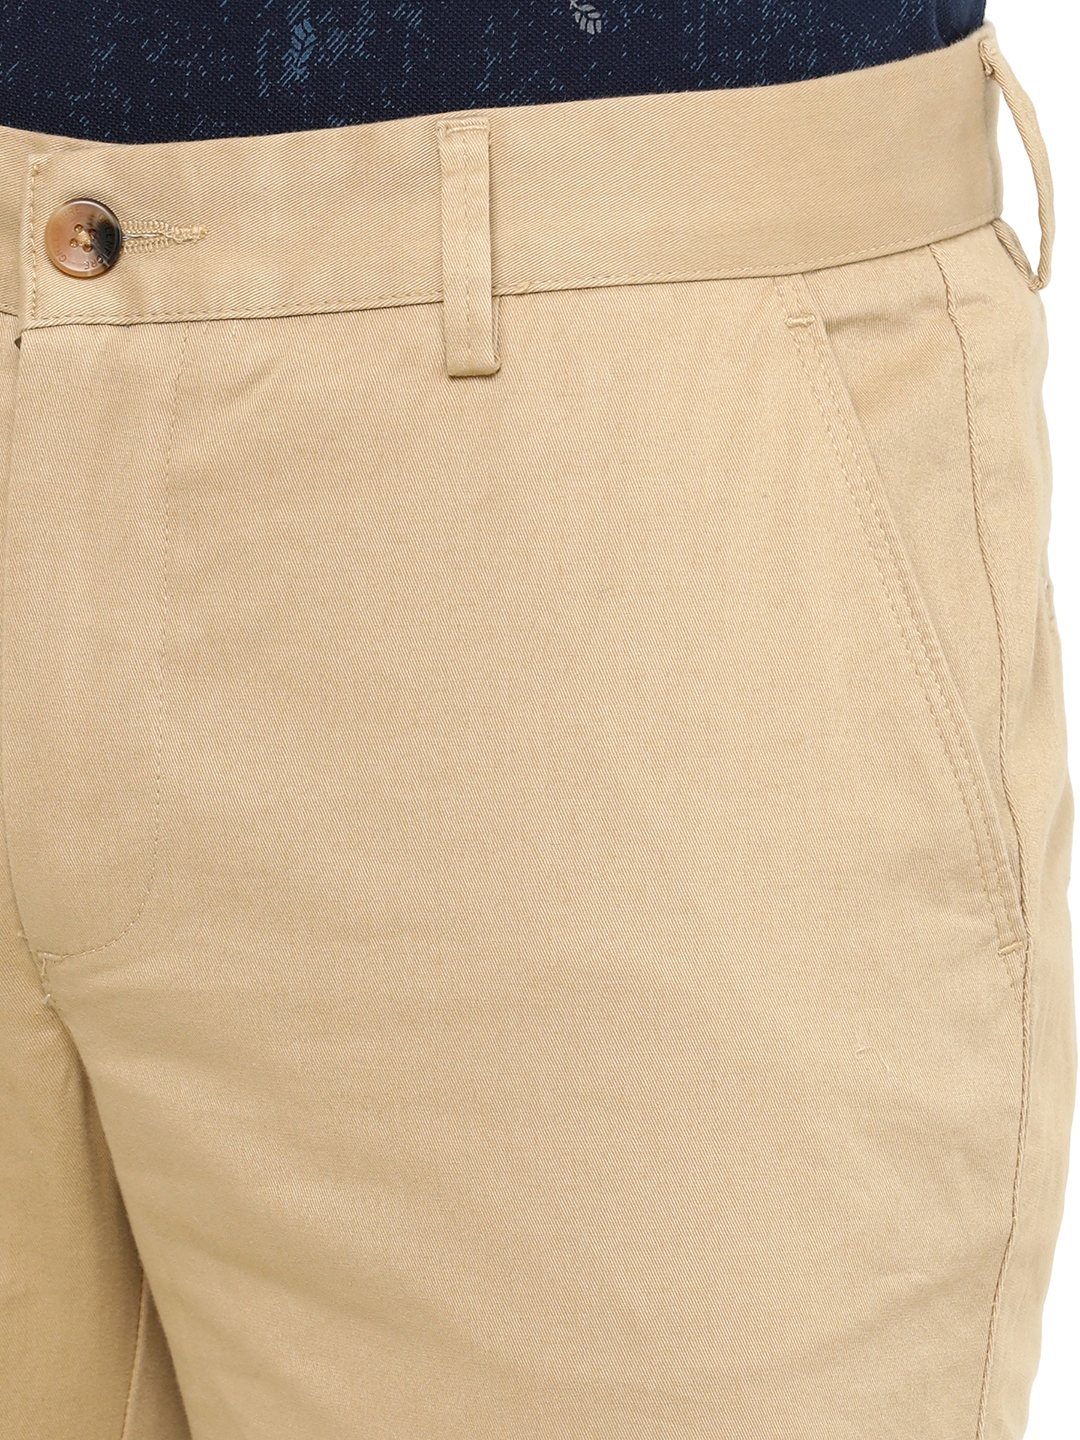 Greenfibre | Beige Solid Super Slim Fit Casual Trouser | Greenfibre 4